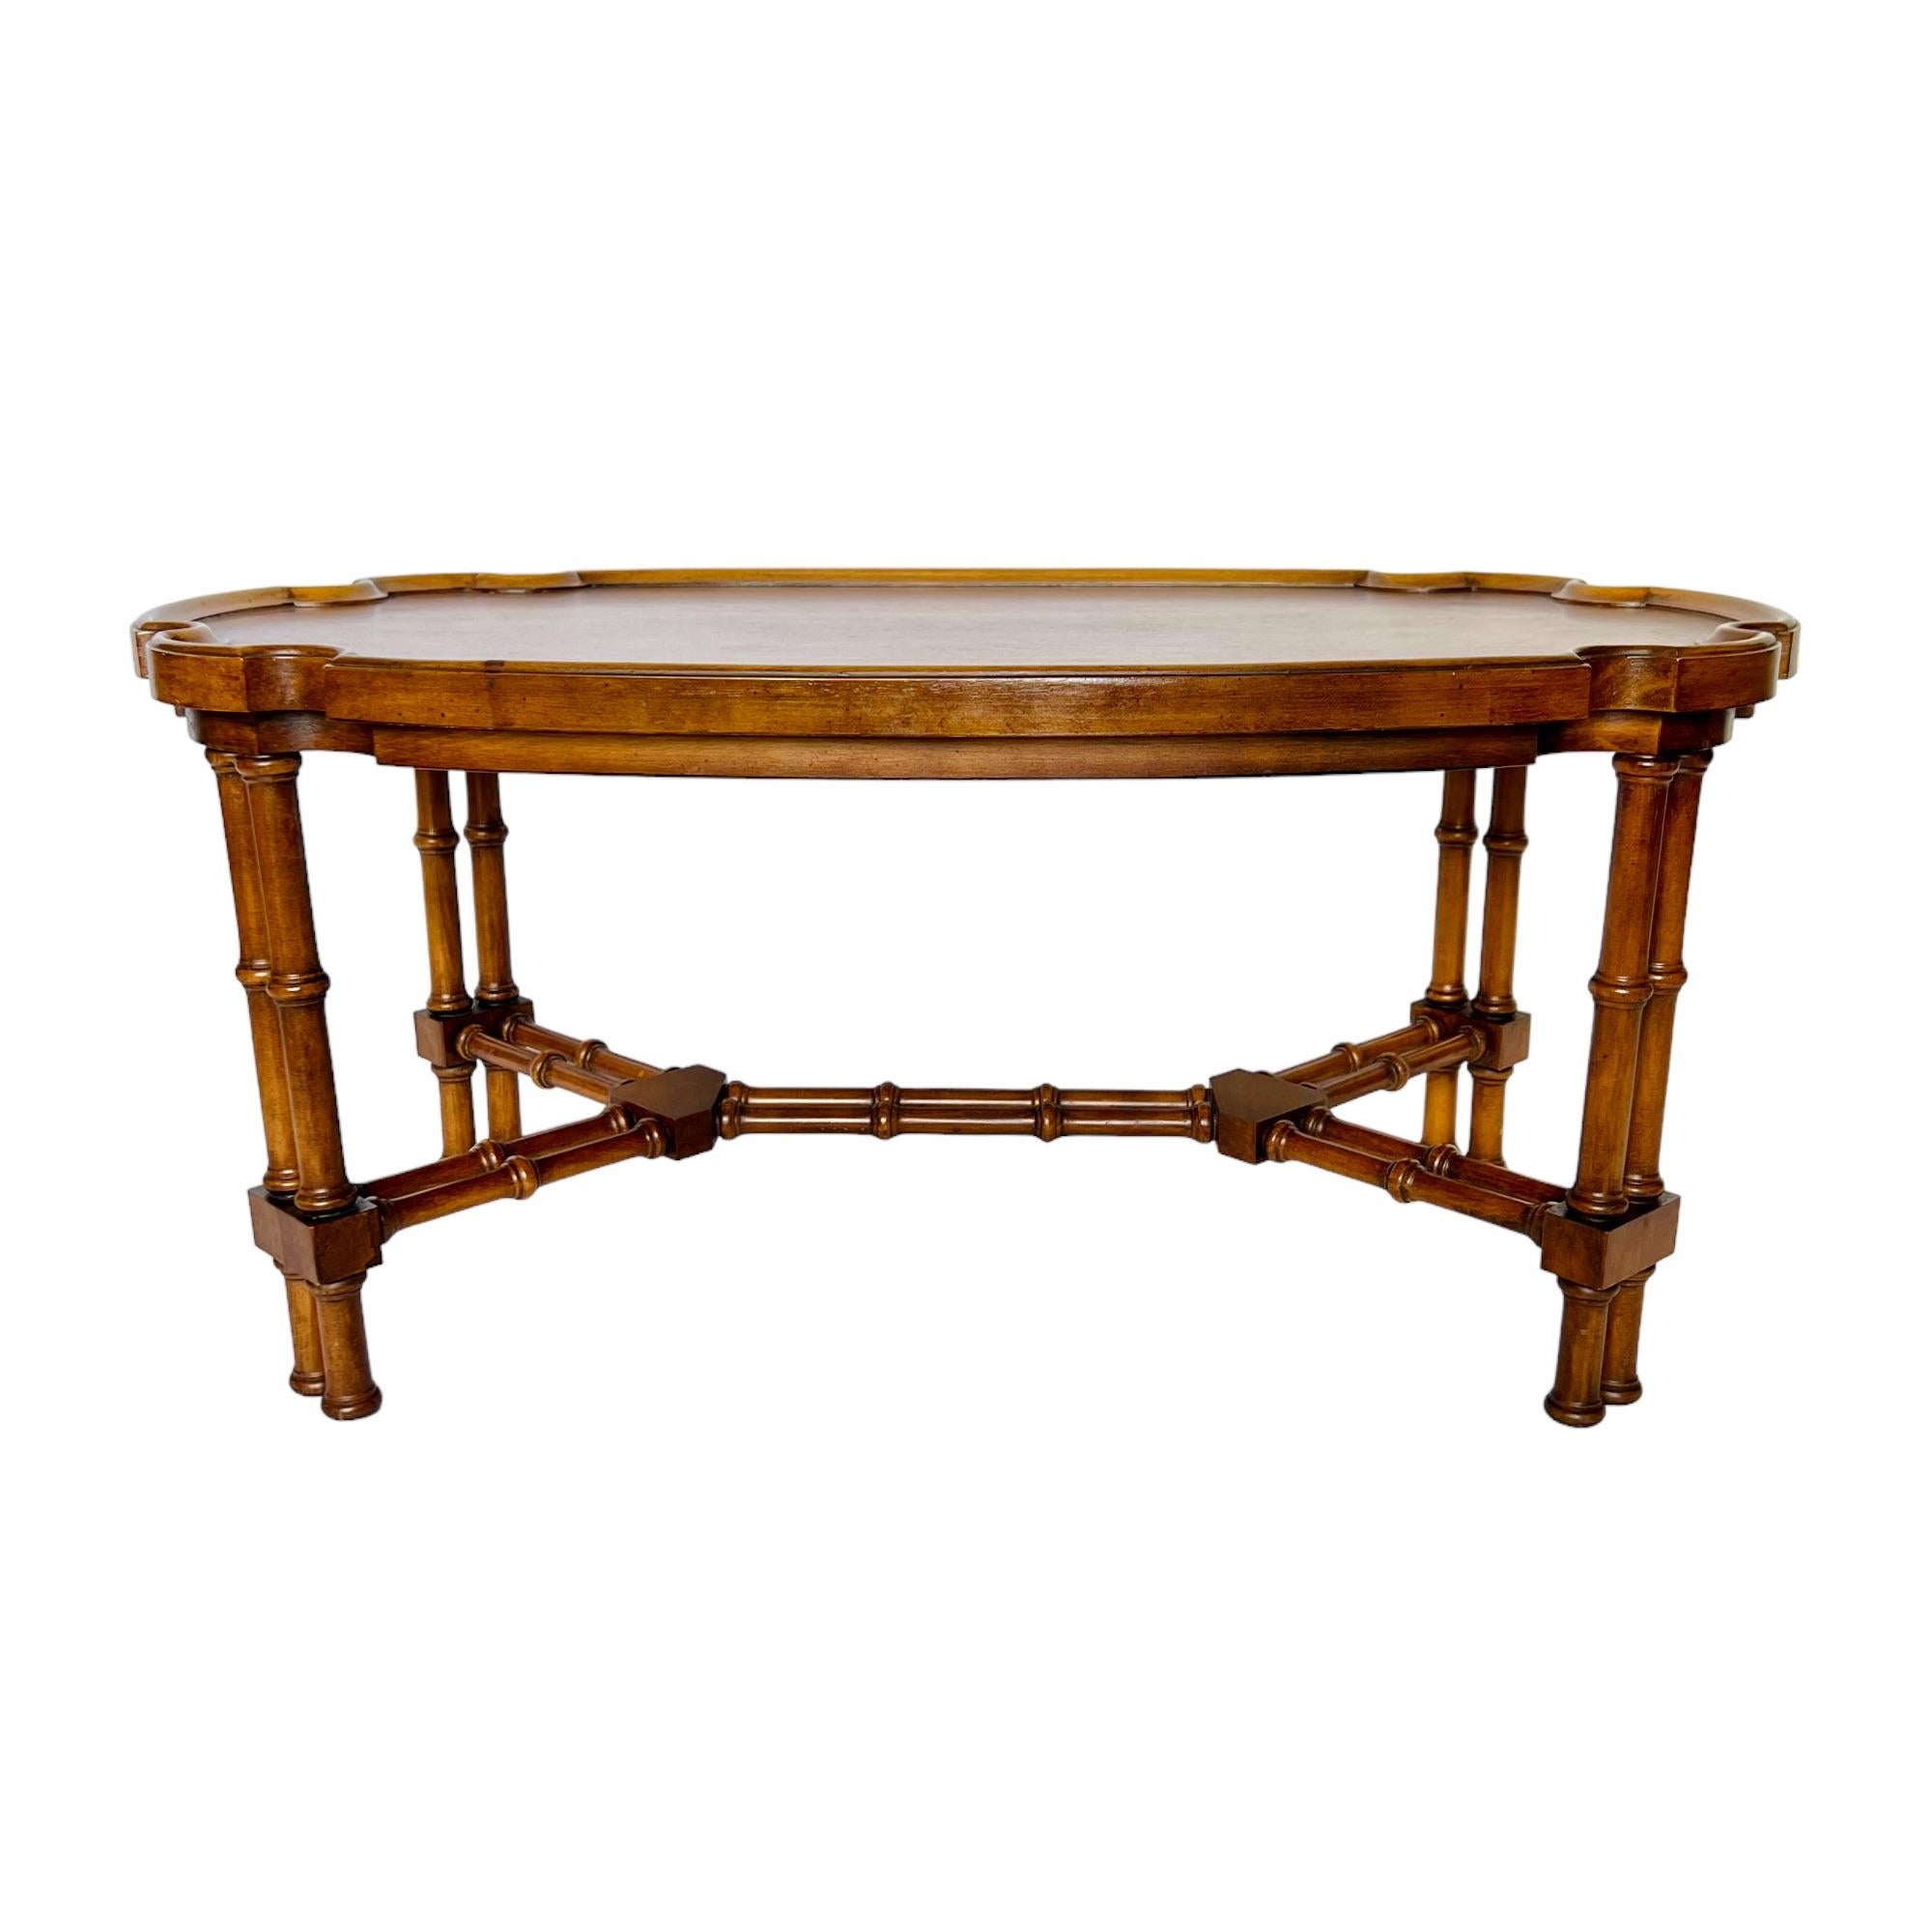 A vintage Asian inspired Chippendale fruitwood cocktail table from Brandt's Embassy collection of the 1960s. It features an oval piecrust style scalloped top with lipped edge supported by banded faux bamboo double shafted legs and